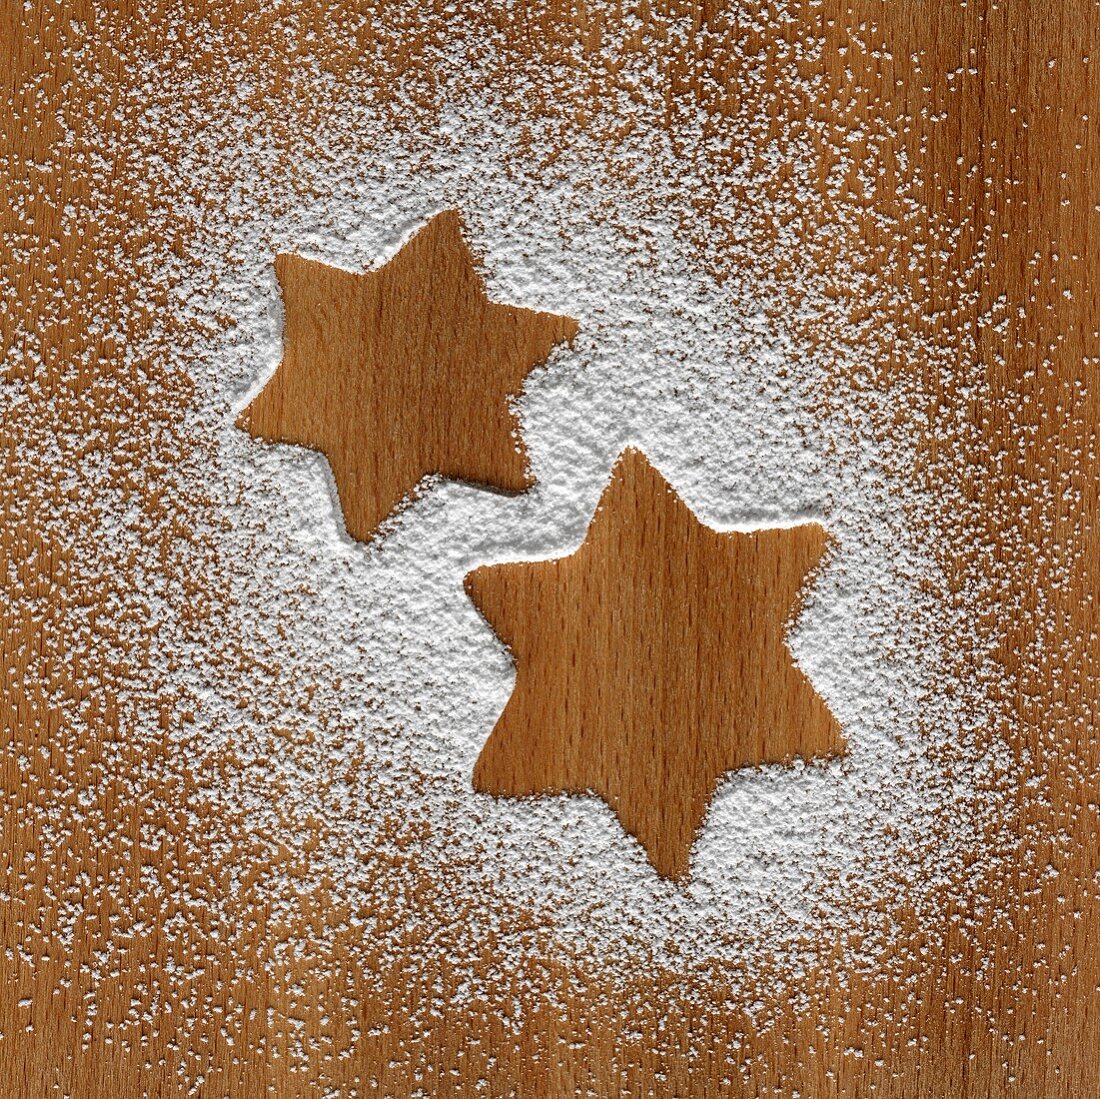 Star shapes in icing sugar on wooden background